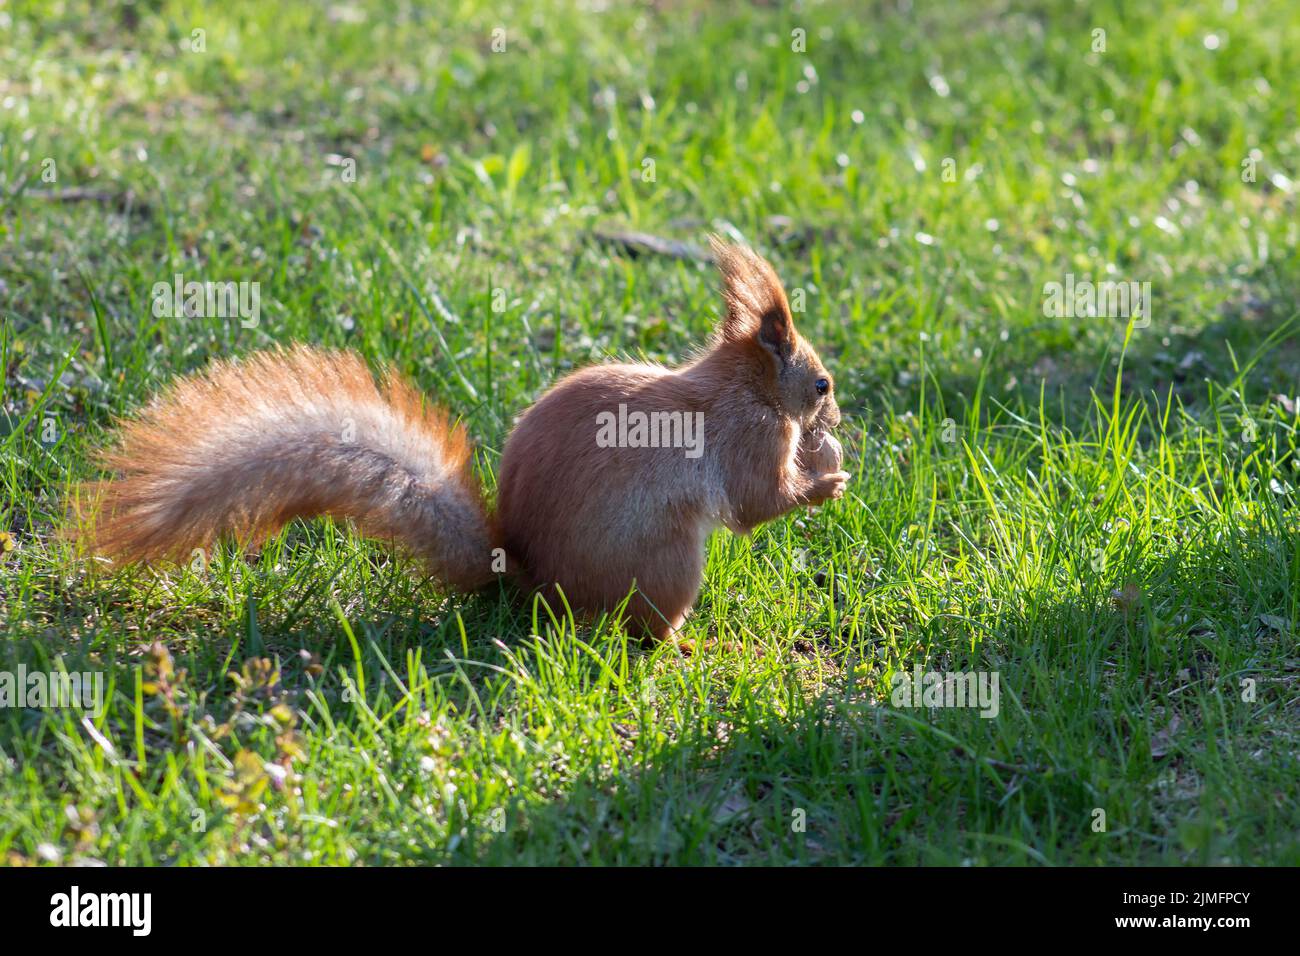 Red squirrel in the garden on the grass eats a nut and basks in the sun. Spring photography Stock Photo